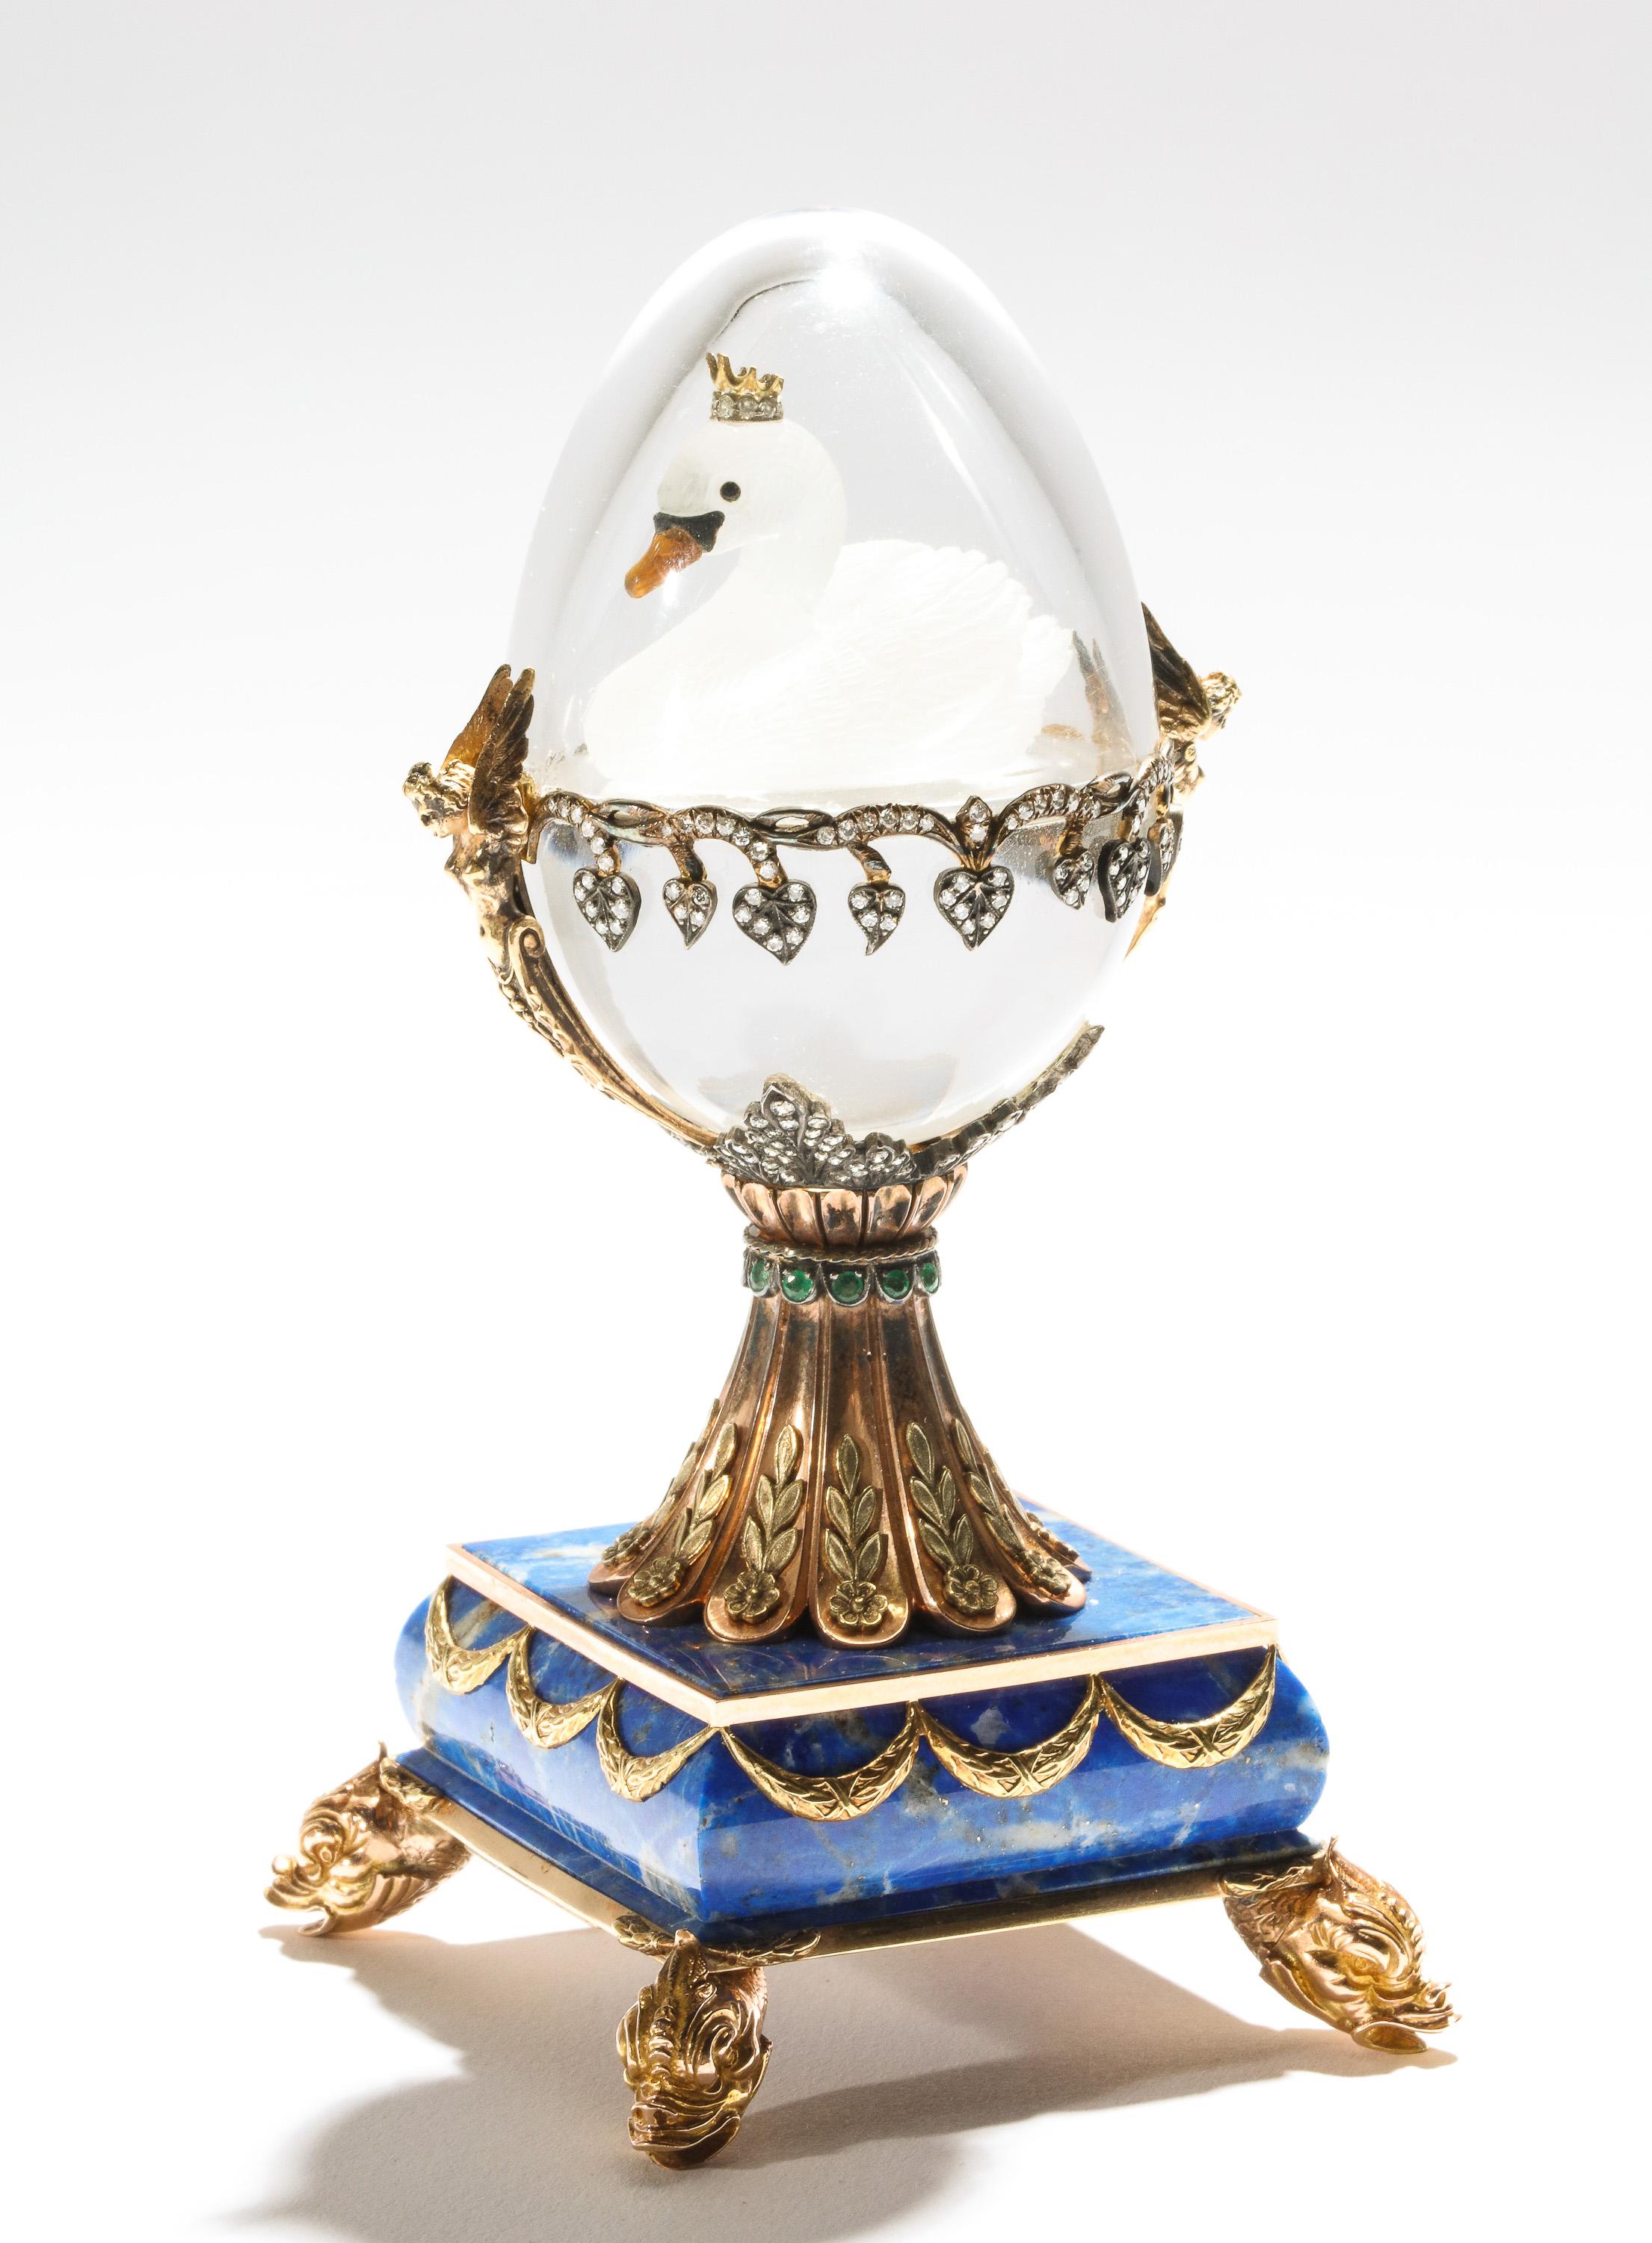 A beautiful Russian 14- karat gold, diamonds, emeralds, lapis lazuli and glass egg with swan, by S. Rudle, 20th century.

Two color, 14-karat gold mounts, the egg in the Faberge style with a floating frosted glass swan, mounted with diamonds,